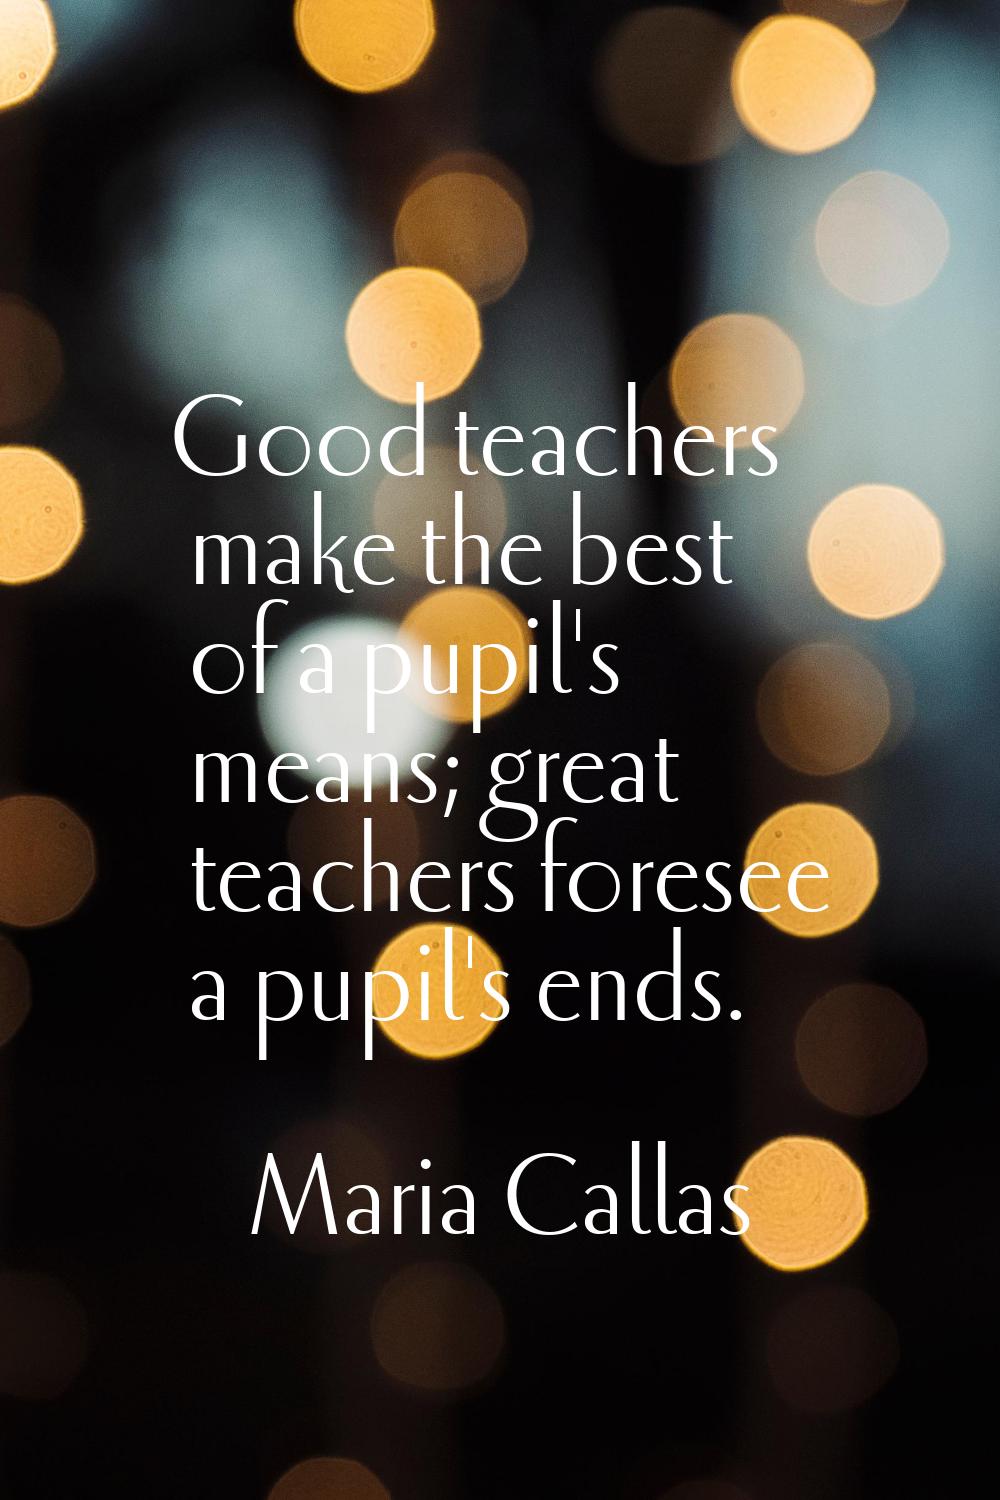 Good teachers make the best of a pupil's means; great teachers foresee a pupil's ends.